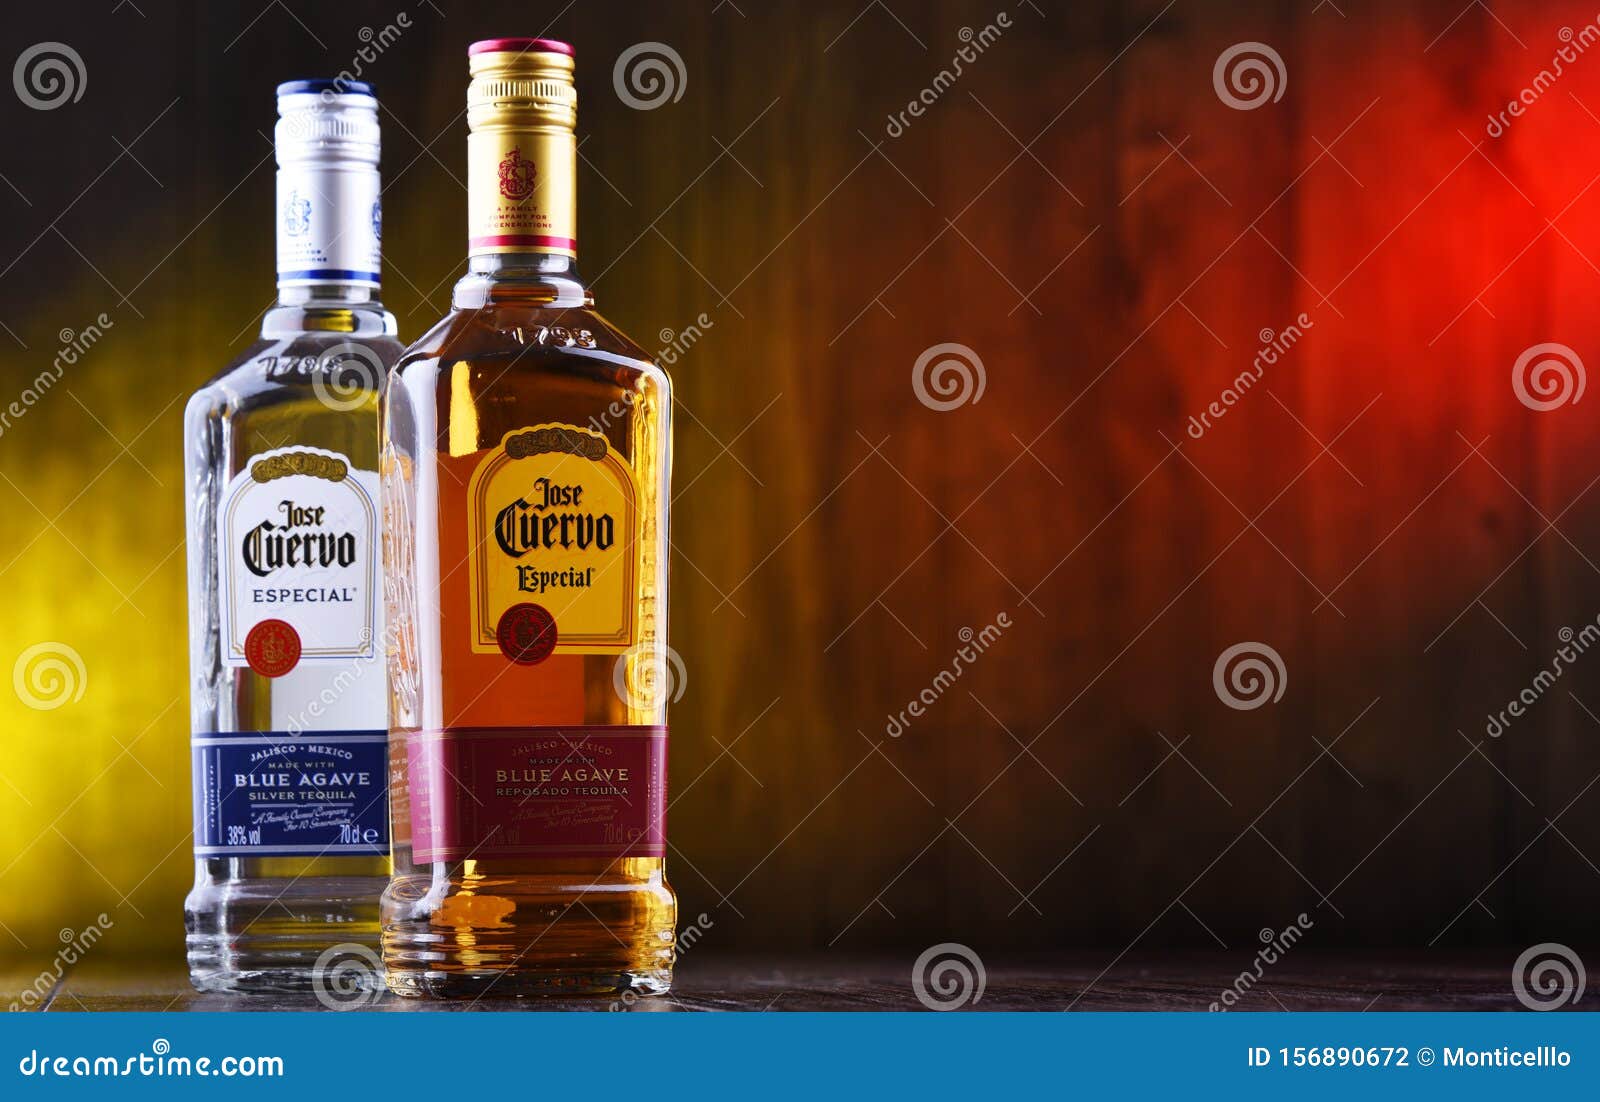 Looking to Buy Jose Cuervo Tequila in Bulk. Try This: Half Gallon of Jose Cuervo Tequila Price May Surprise You